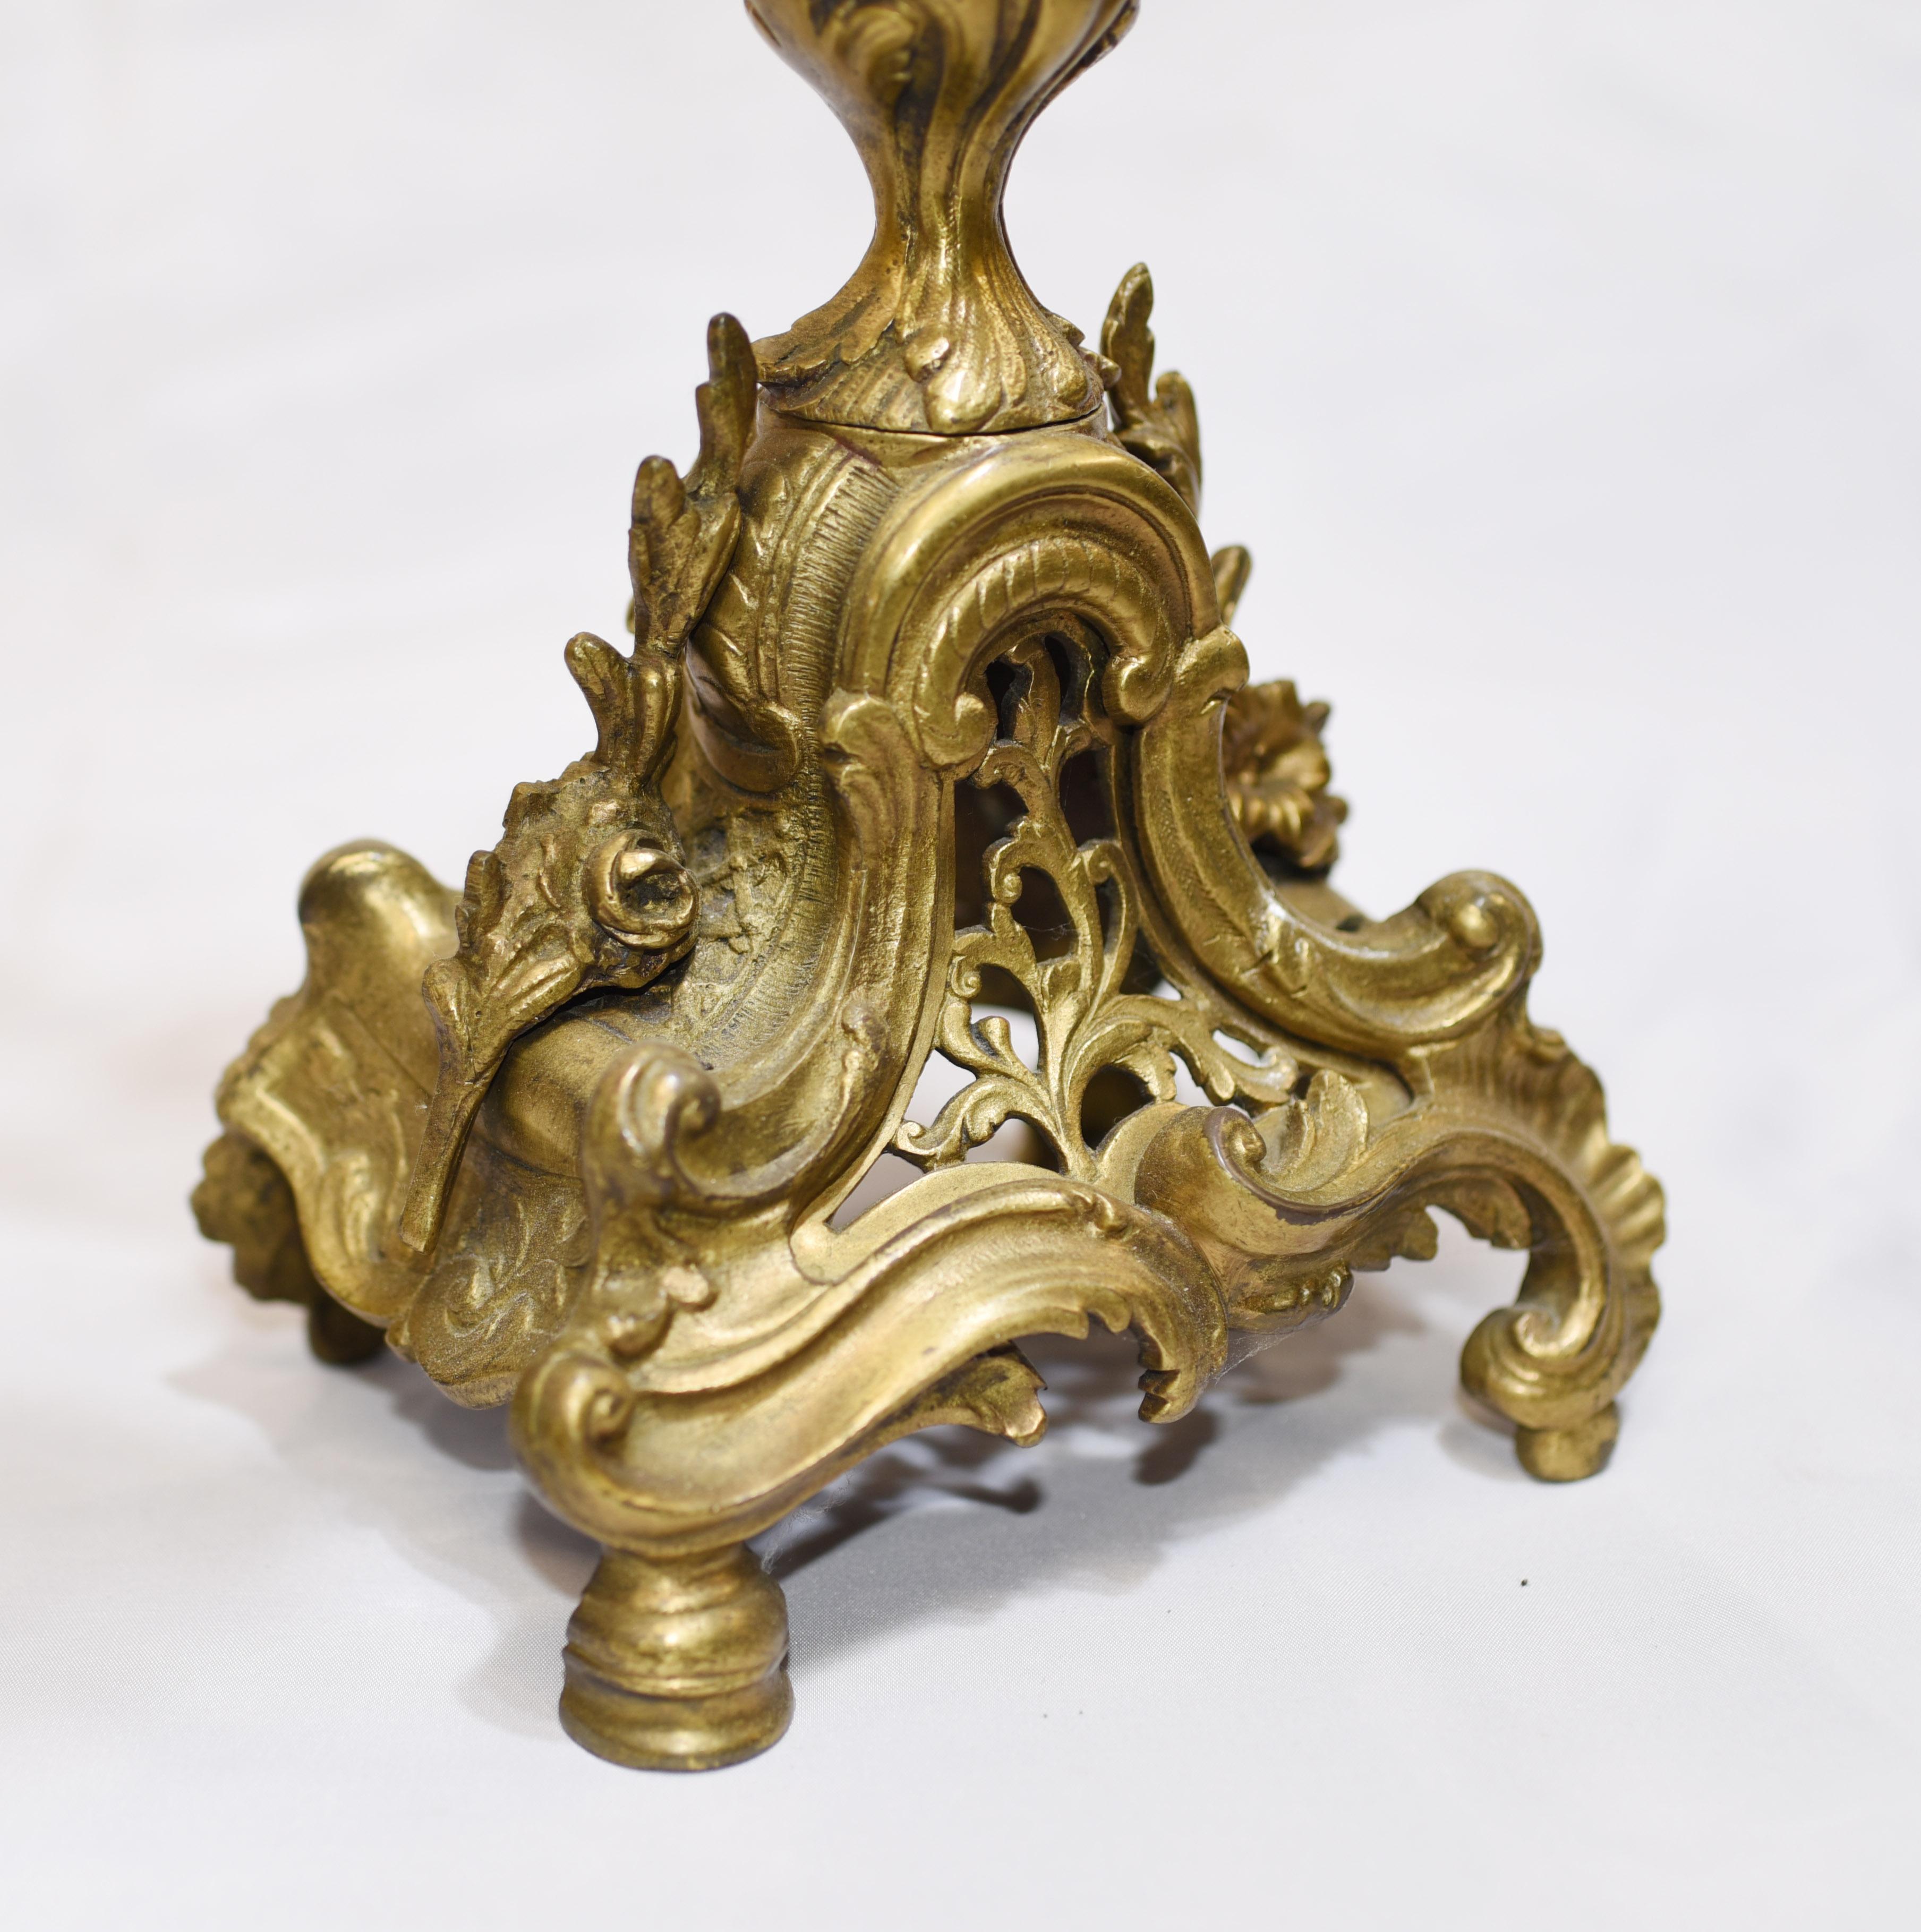 - Gorgeous antique French bronze clock set 
- Gilt clock is surmounted by gorgeous cherub and flanked by candelabras
- Great patina to gilt 
- Purchased from a dealer on Marche Biron at Paris antiques markets
- Viewings available by